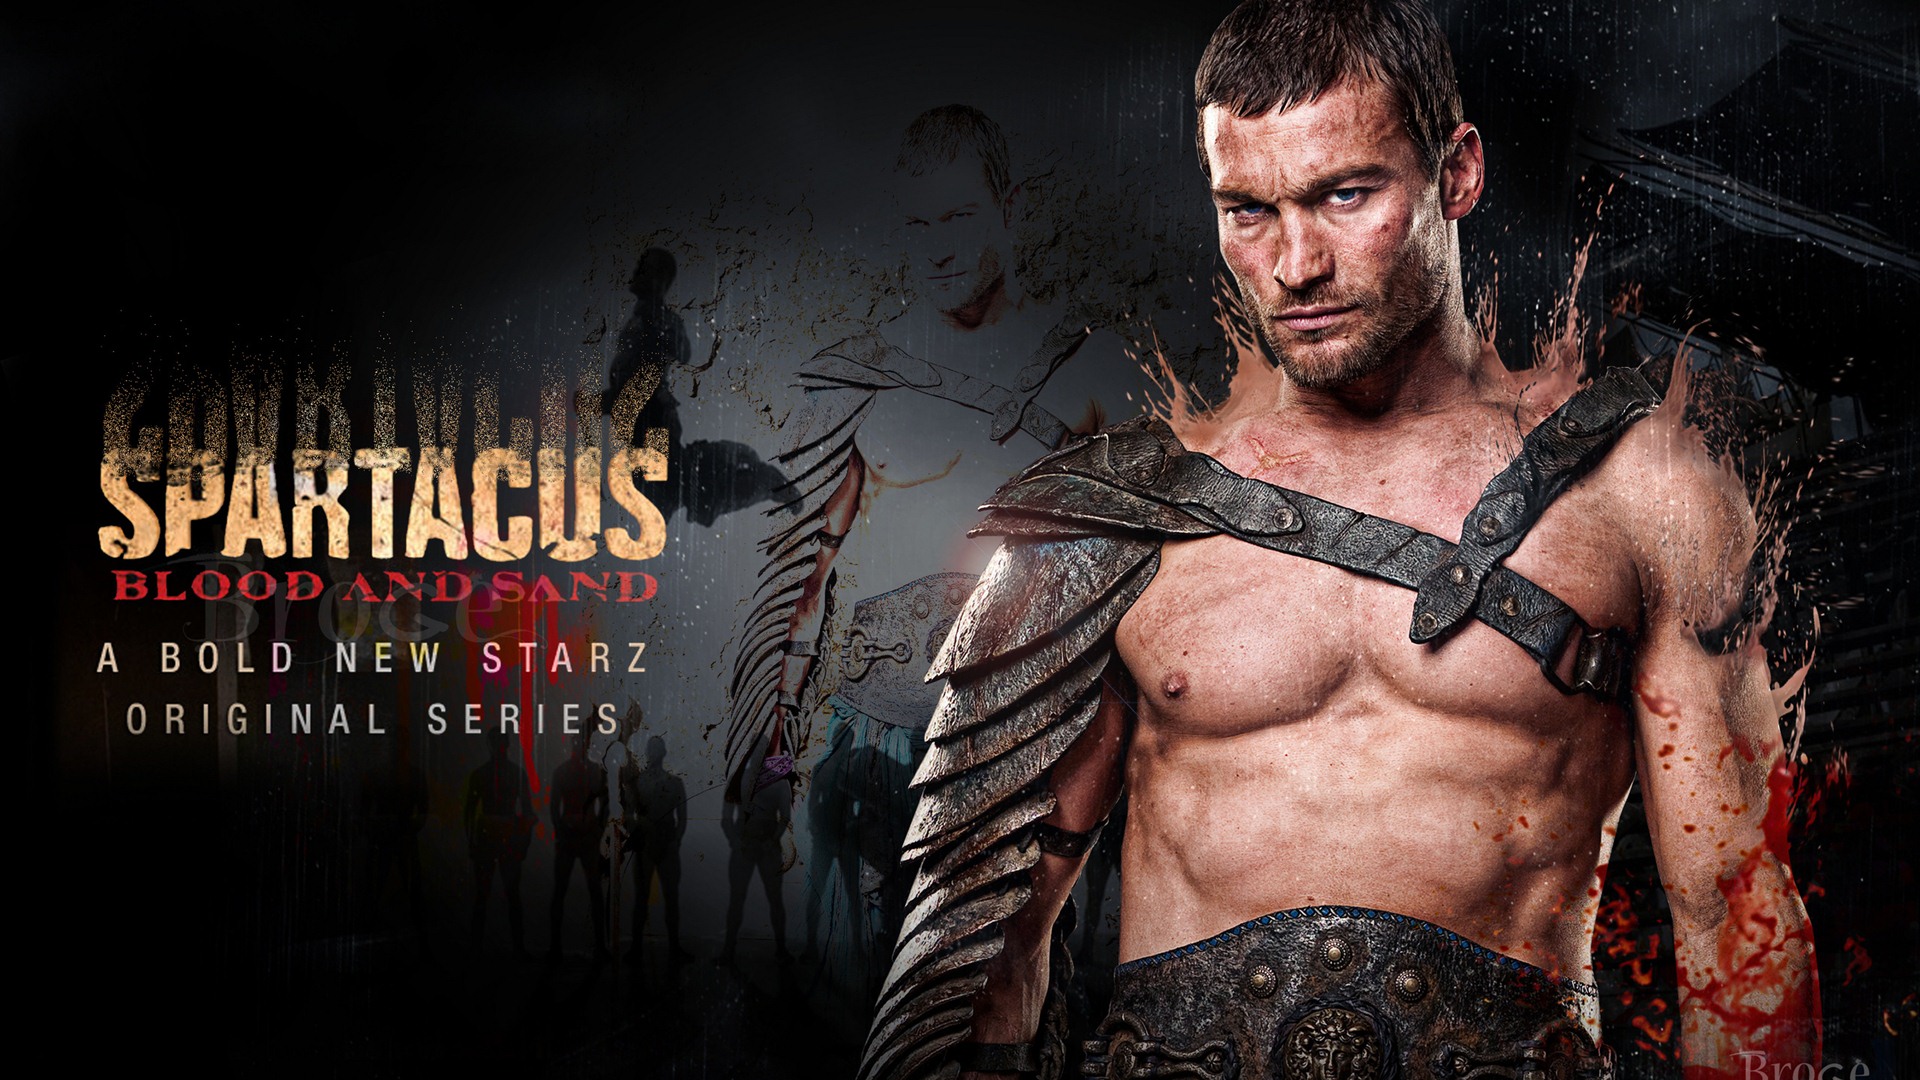 Spartacus: Blood and Sand HD wallpapers #14 - 1920x1080